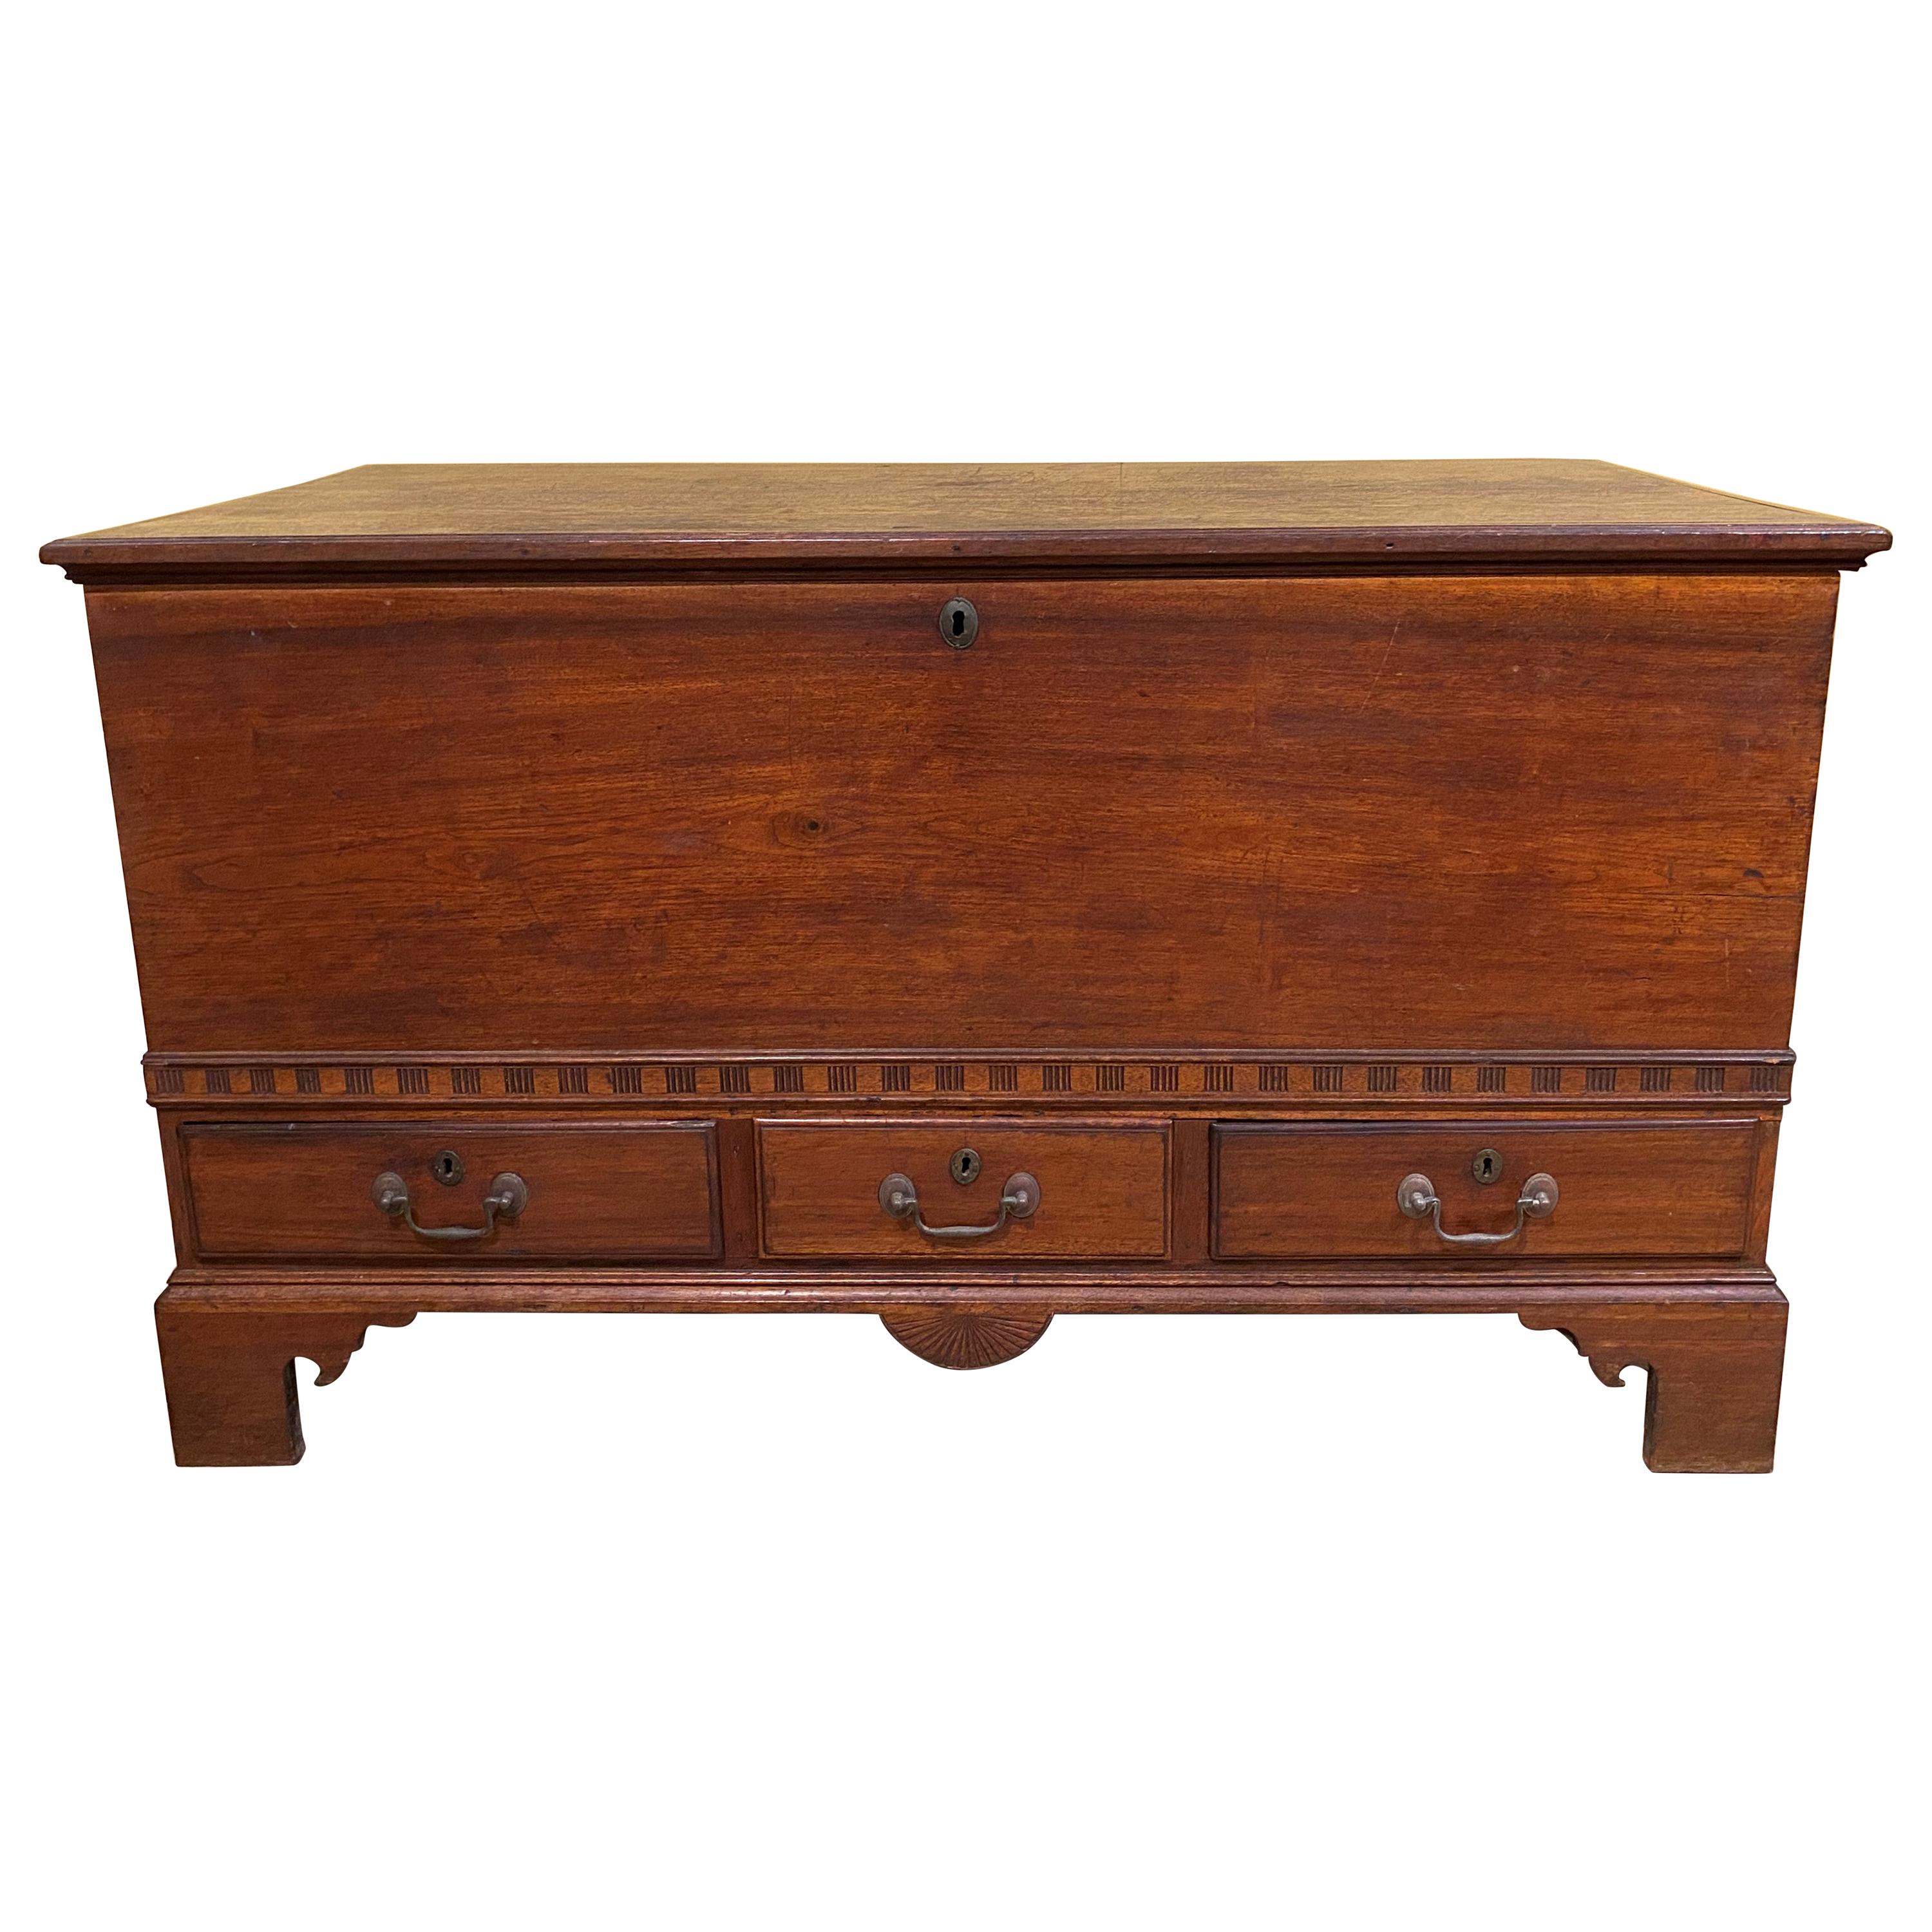 Pennsylvania Walnut Country Blanket Chest with 3 Drawers